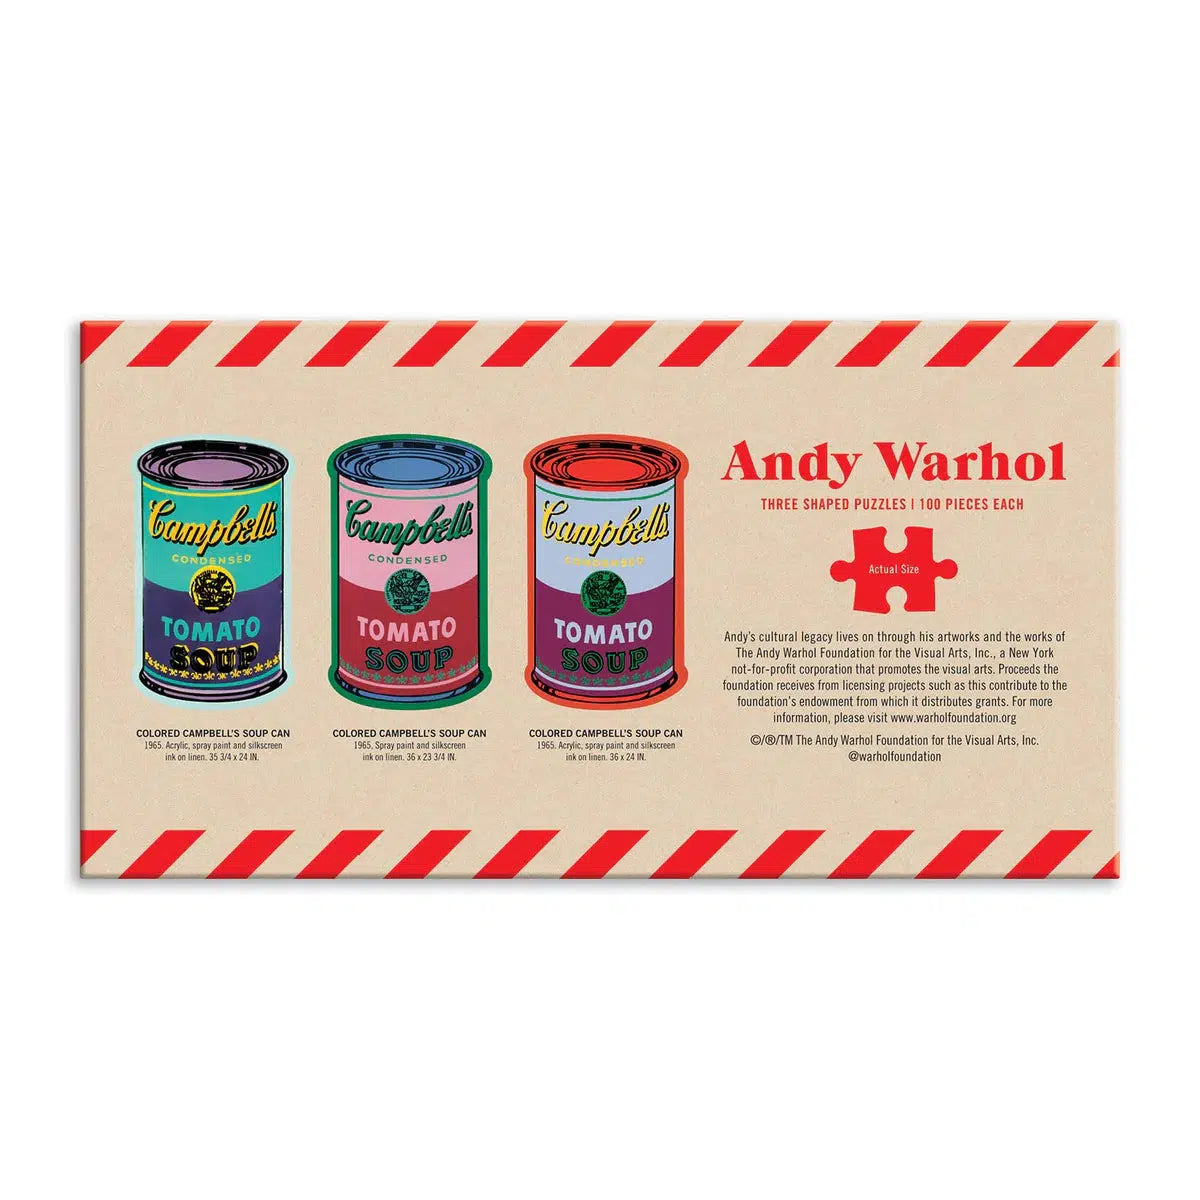 Andy Warhol Soup Cans Set of 3 100 Piece Shaped Puzzles in Tins Galison